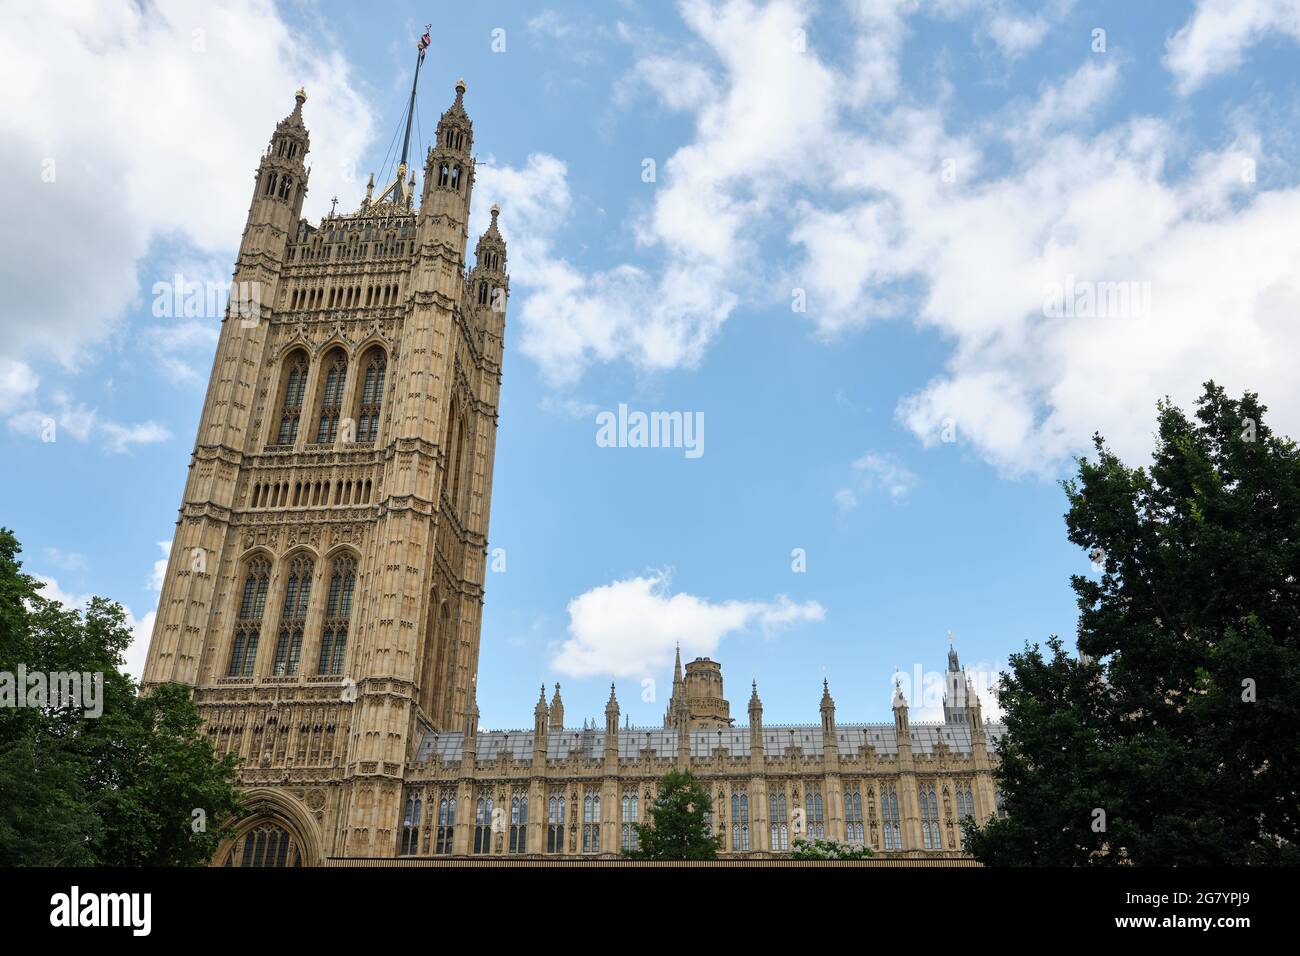 A view of the Victoria Tower at the House of Lords end of the Palace of Westminster from Victoria Tower Gardens South. Stock Photo